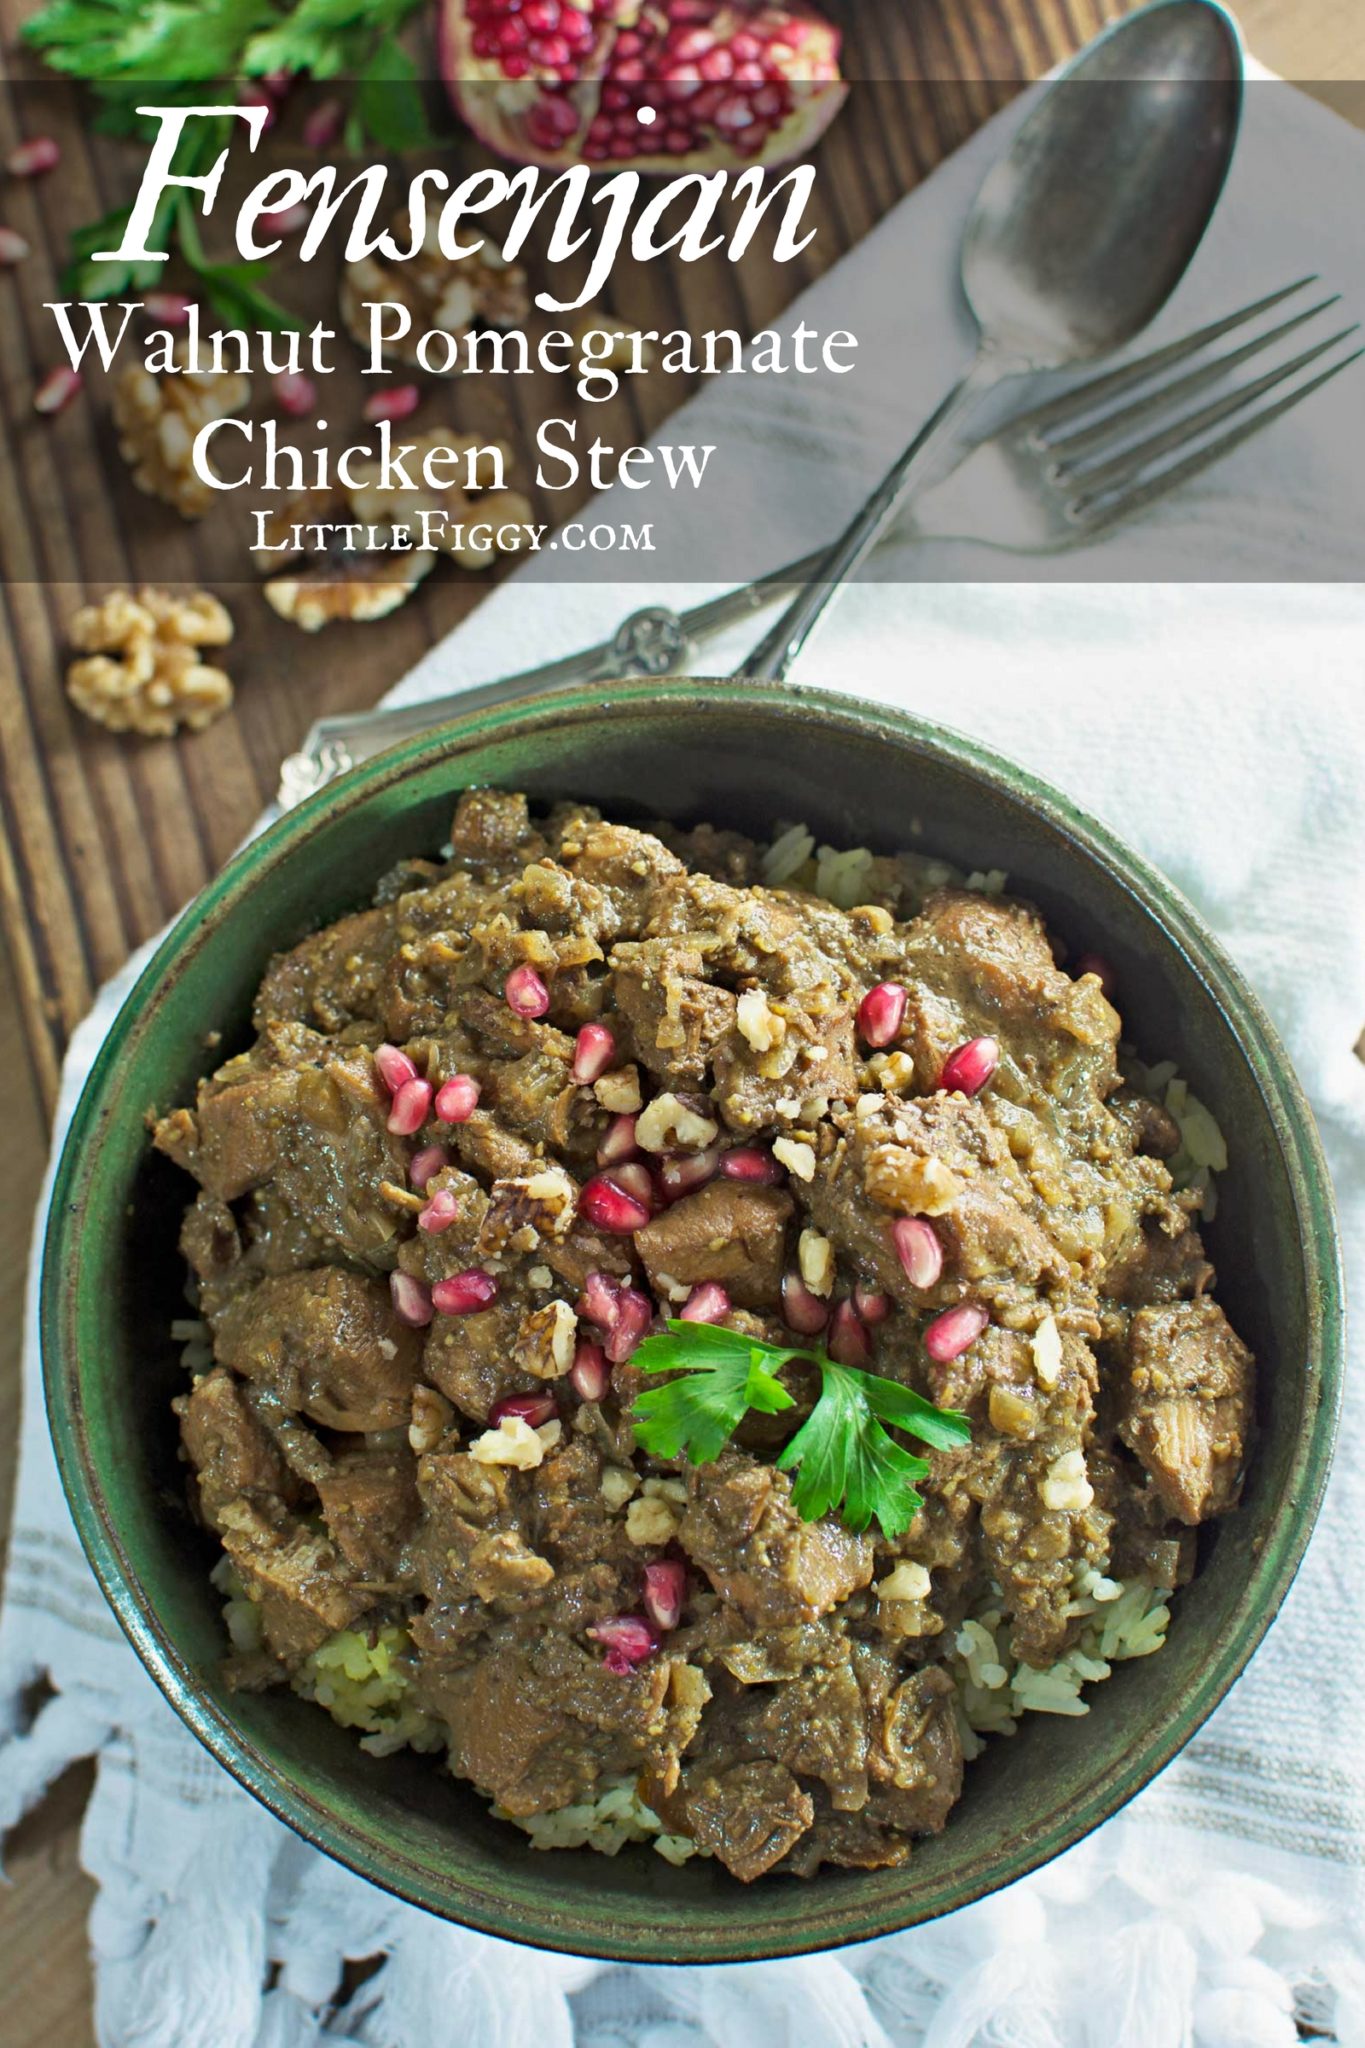 Fensenjan, an Iranian Walnut Pomegranate Chicken Stew, perfect served with flat bread or your favorite rice. Using only the best #walnuts, @California Walnuts - Recipe at @LittleFiggyFood # CG #ad 